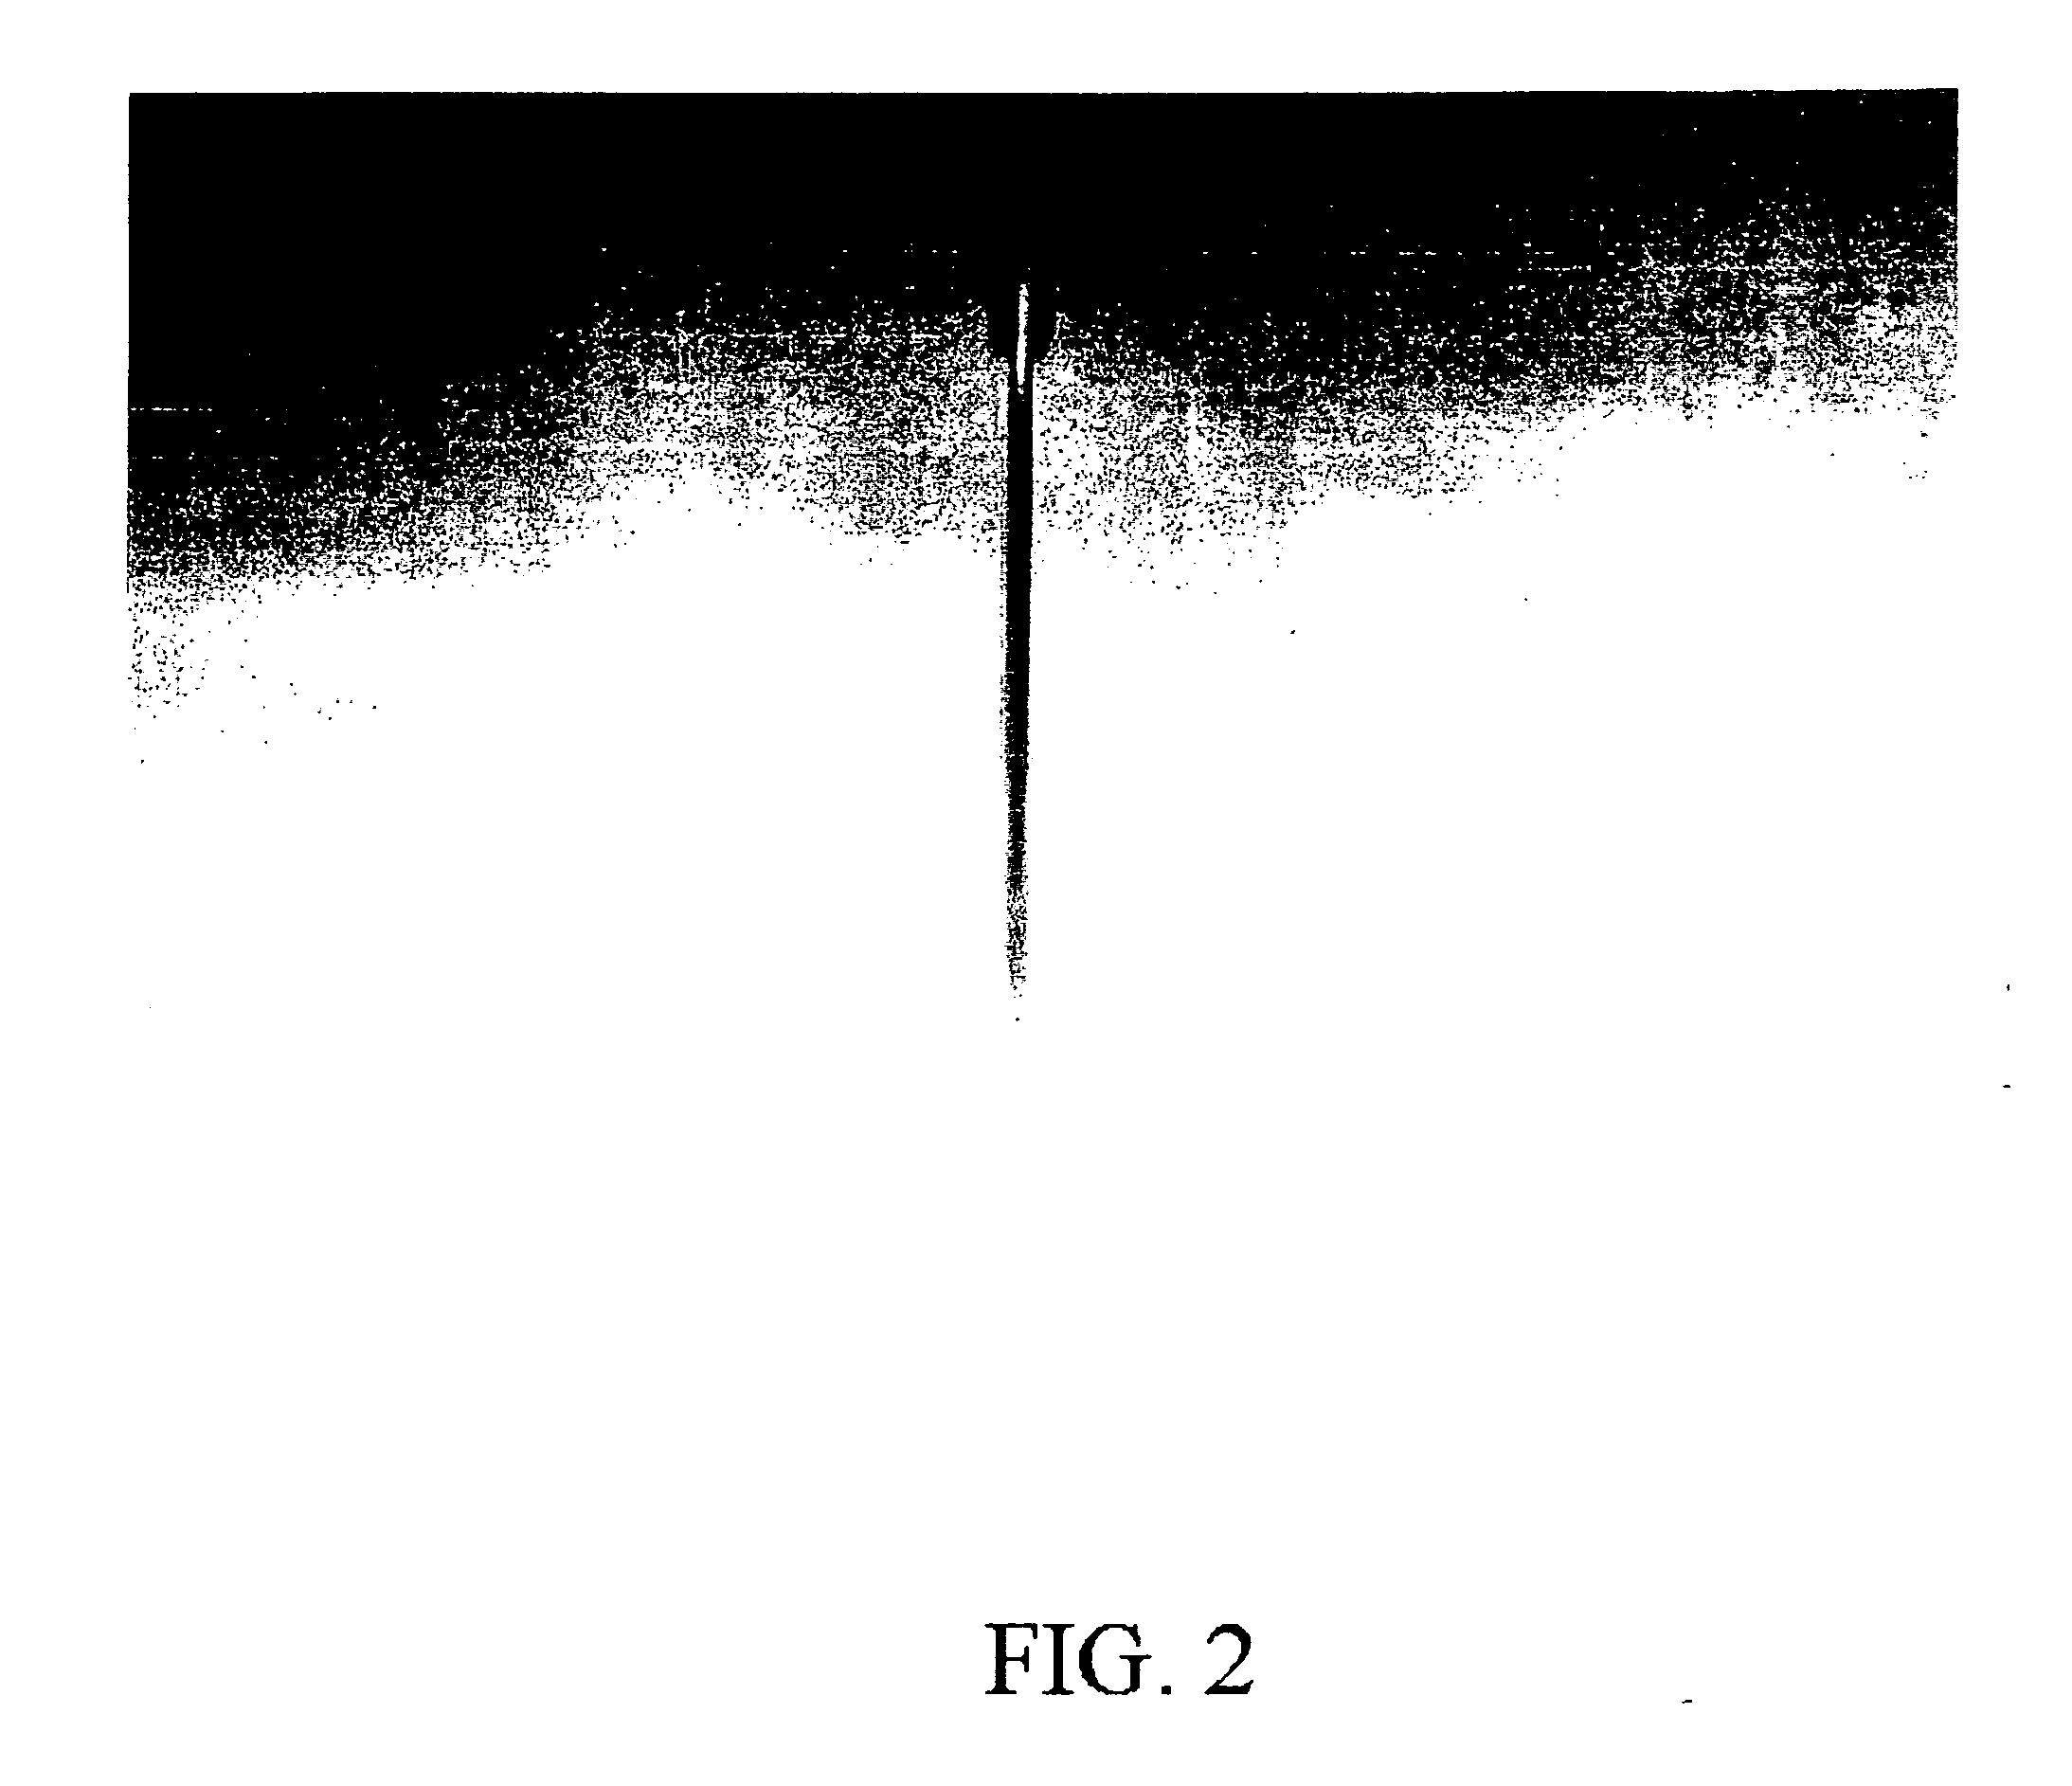 Photocurable pigment type inkjet ink composition